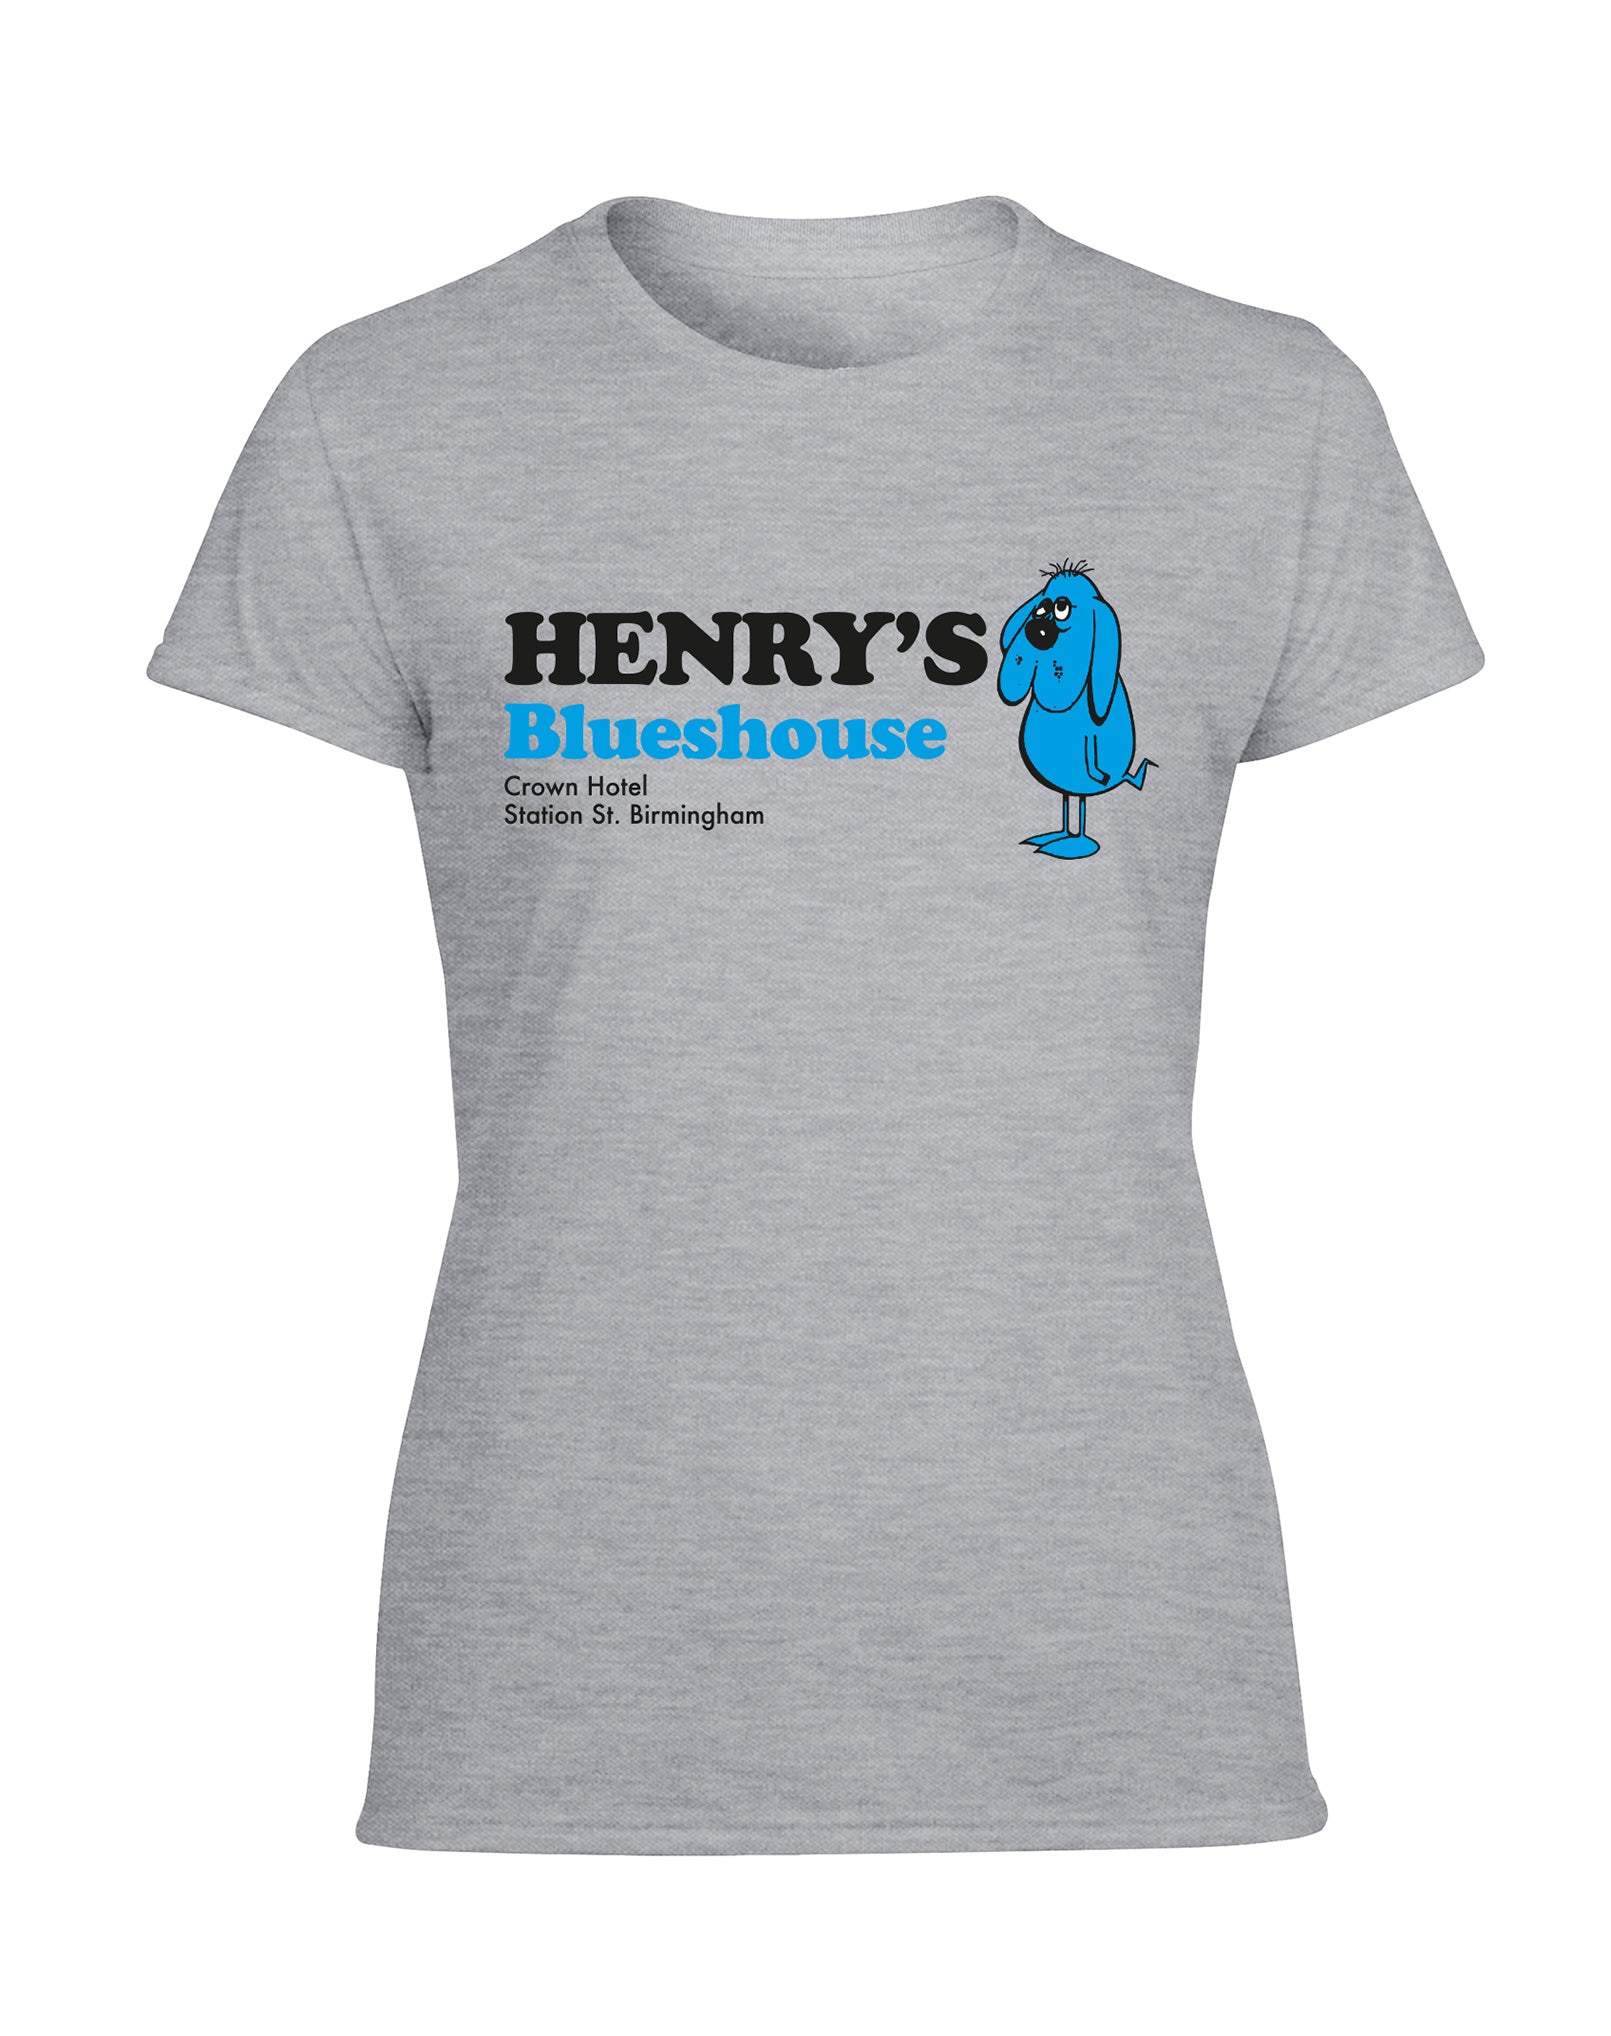 Henry's Blueshouse ladies fit T-shirt - various colours - Dirty Stop Outs